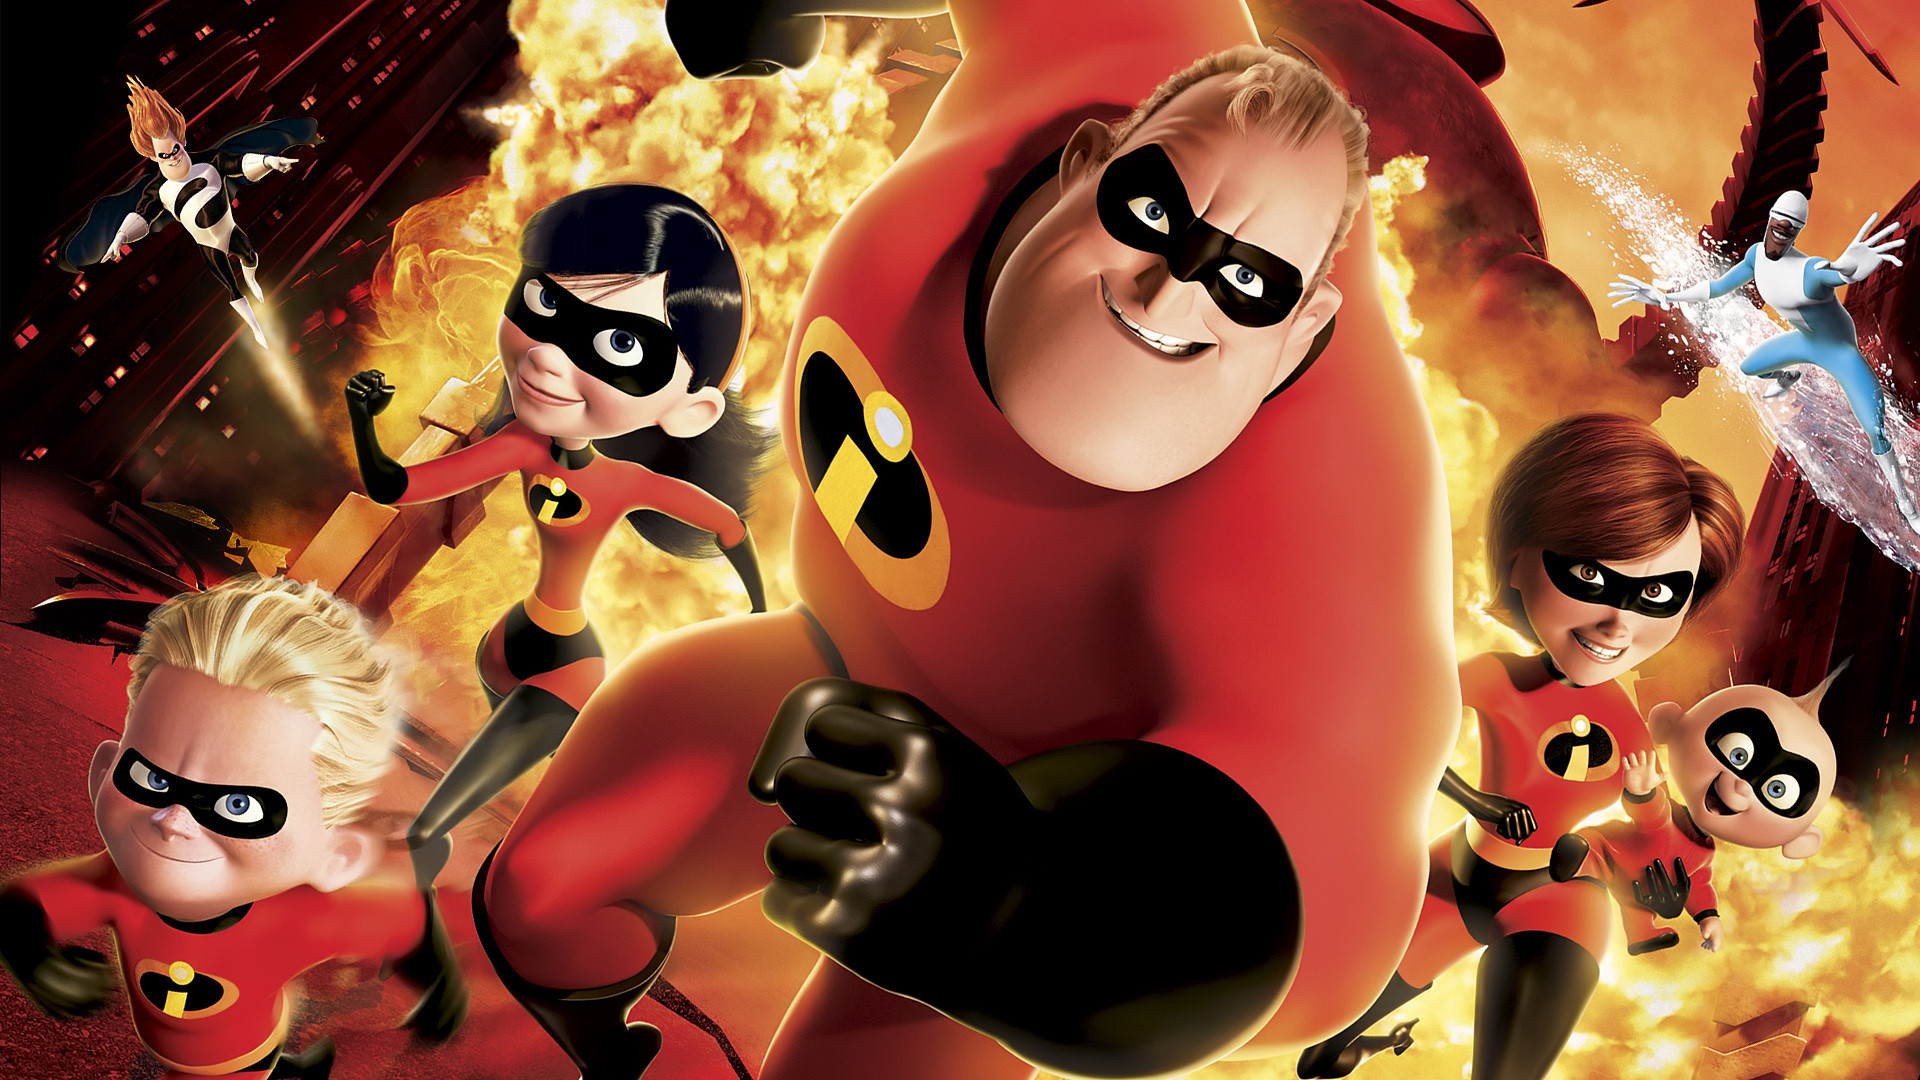 The Incredibles: Rise of the Underminer